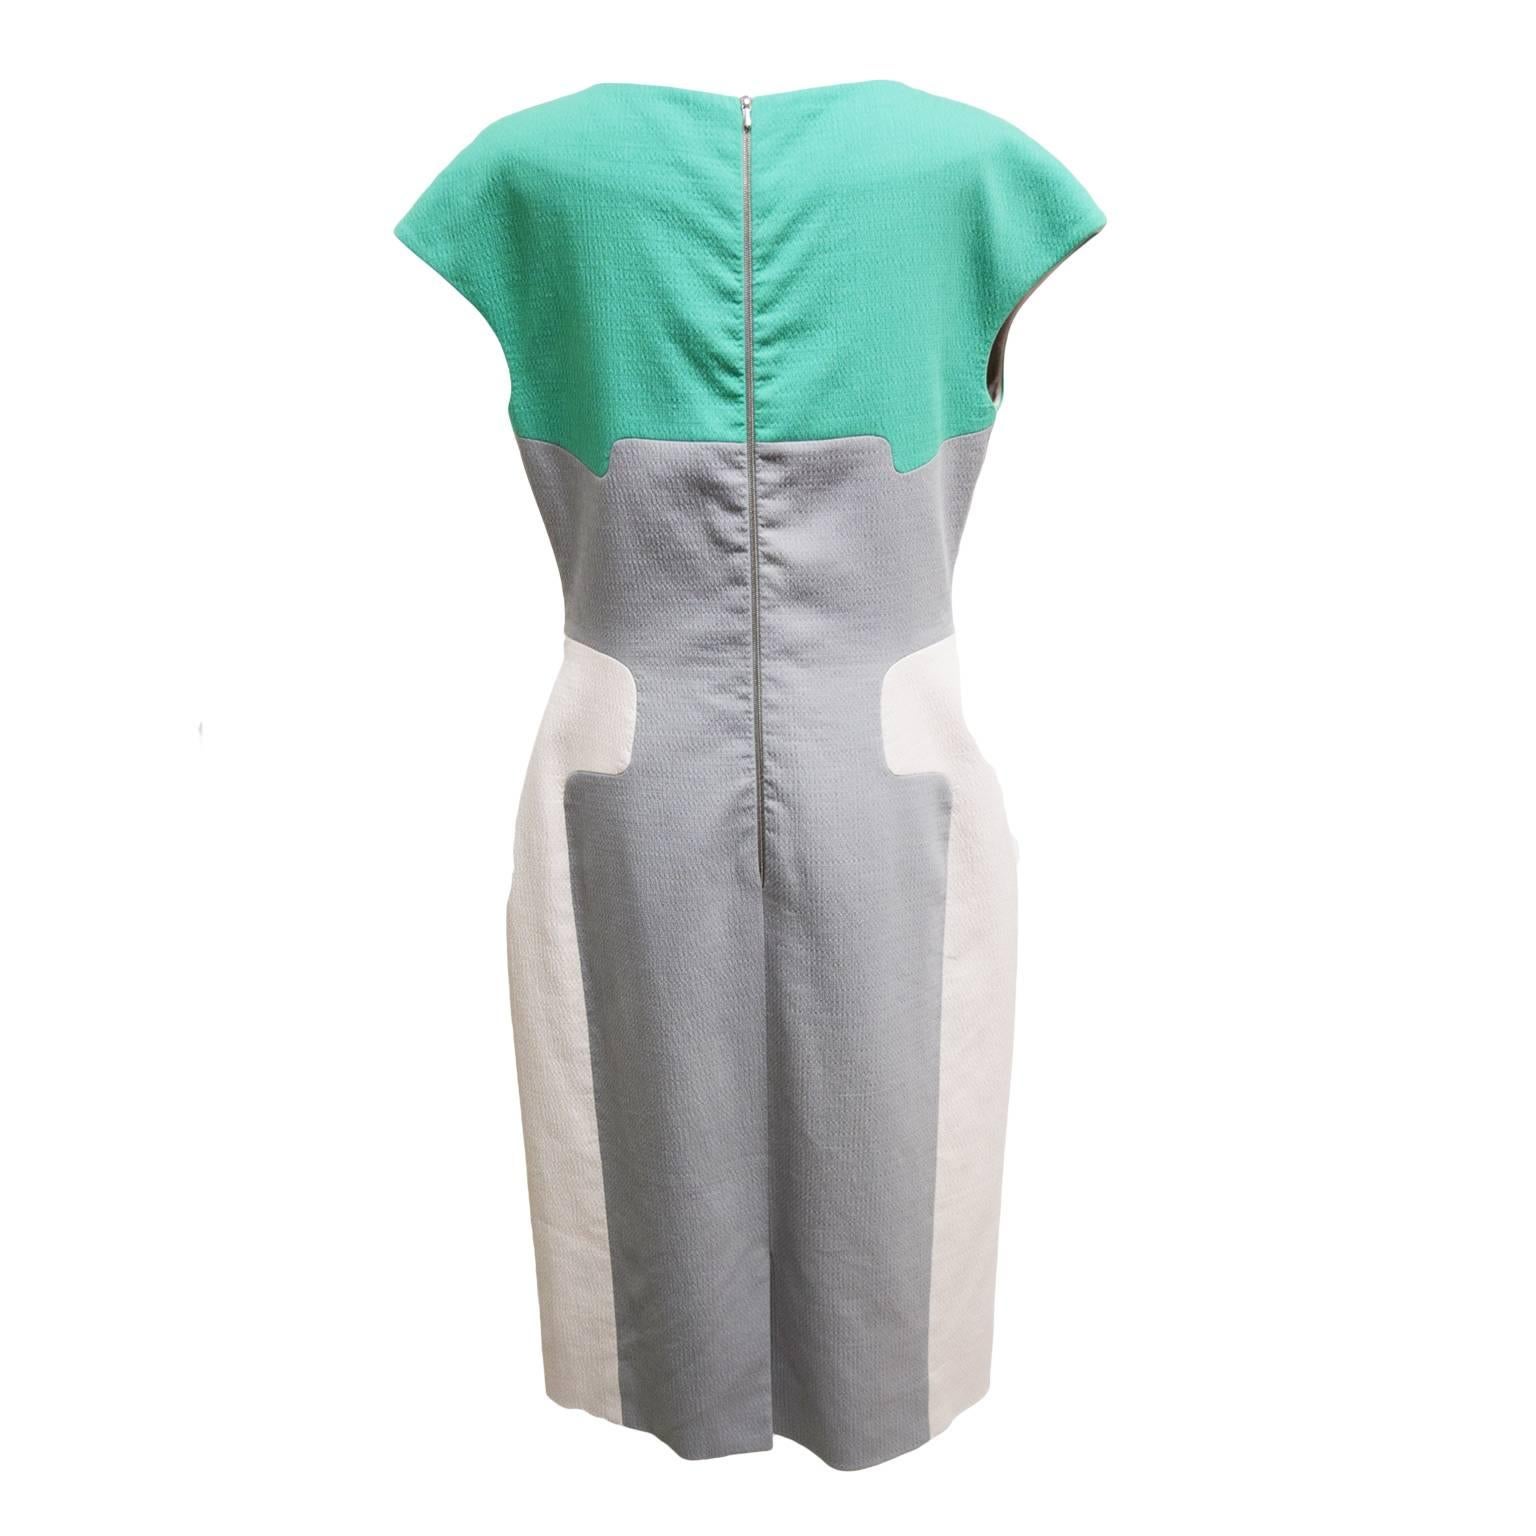 This dress by Lela Rose is a cotton, elastic, silk blend, and color blocked with grey, ivory, and mint coloration. The sleeves are short and the shaped colors allow for a slimming look. The dress also has a back zipped closure and is fully lined. 